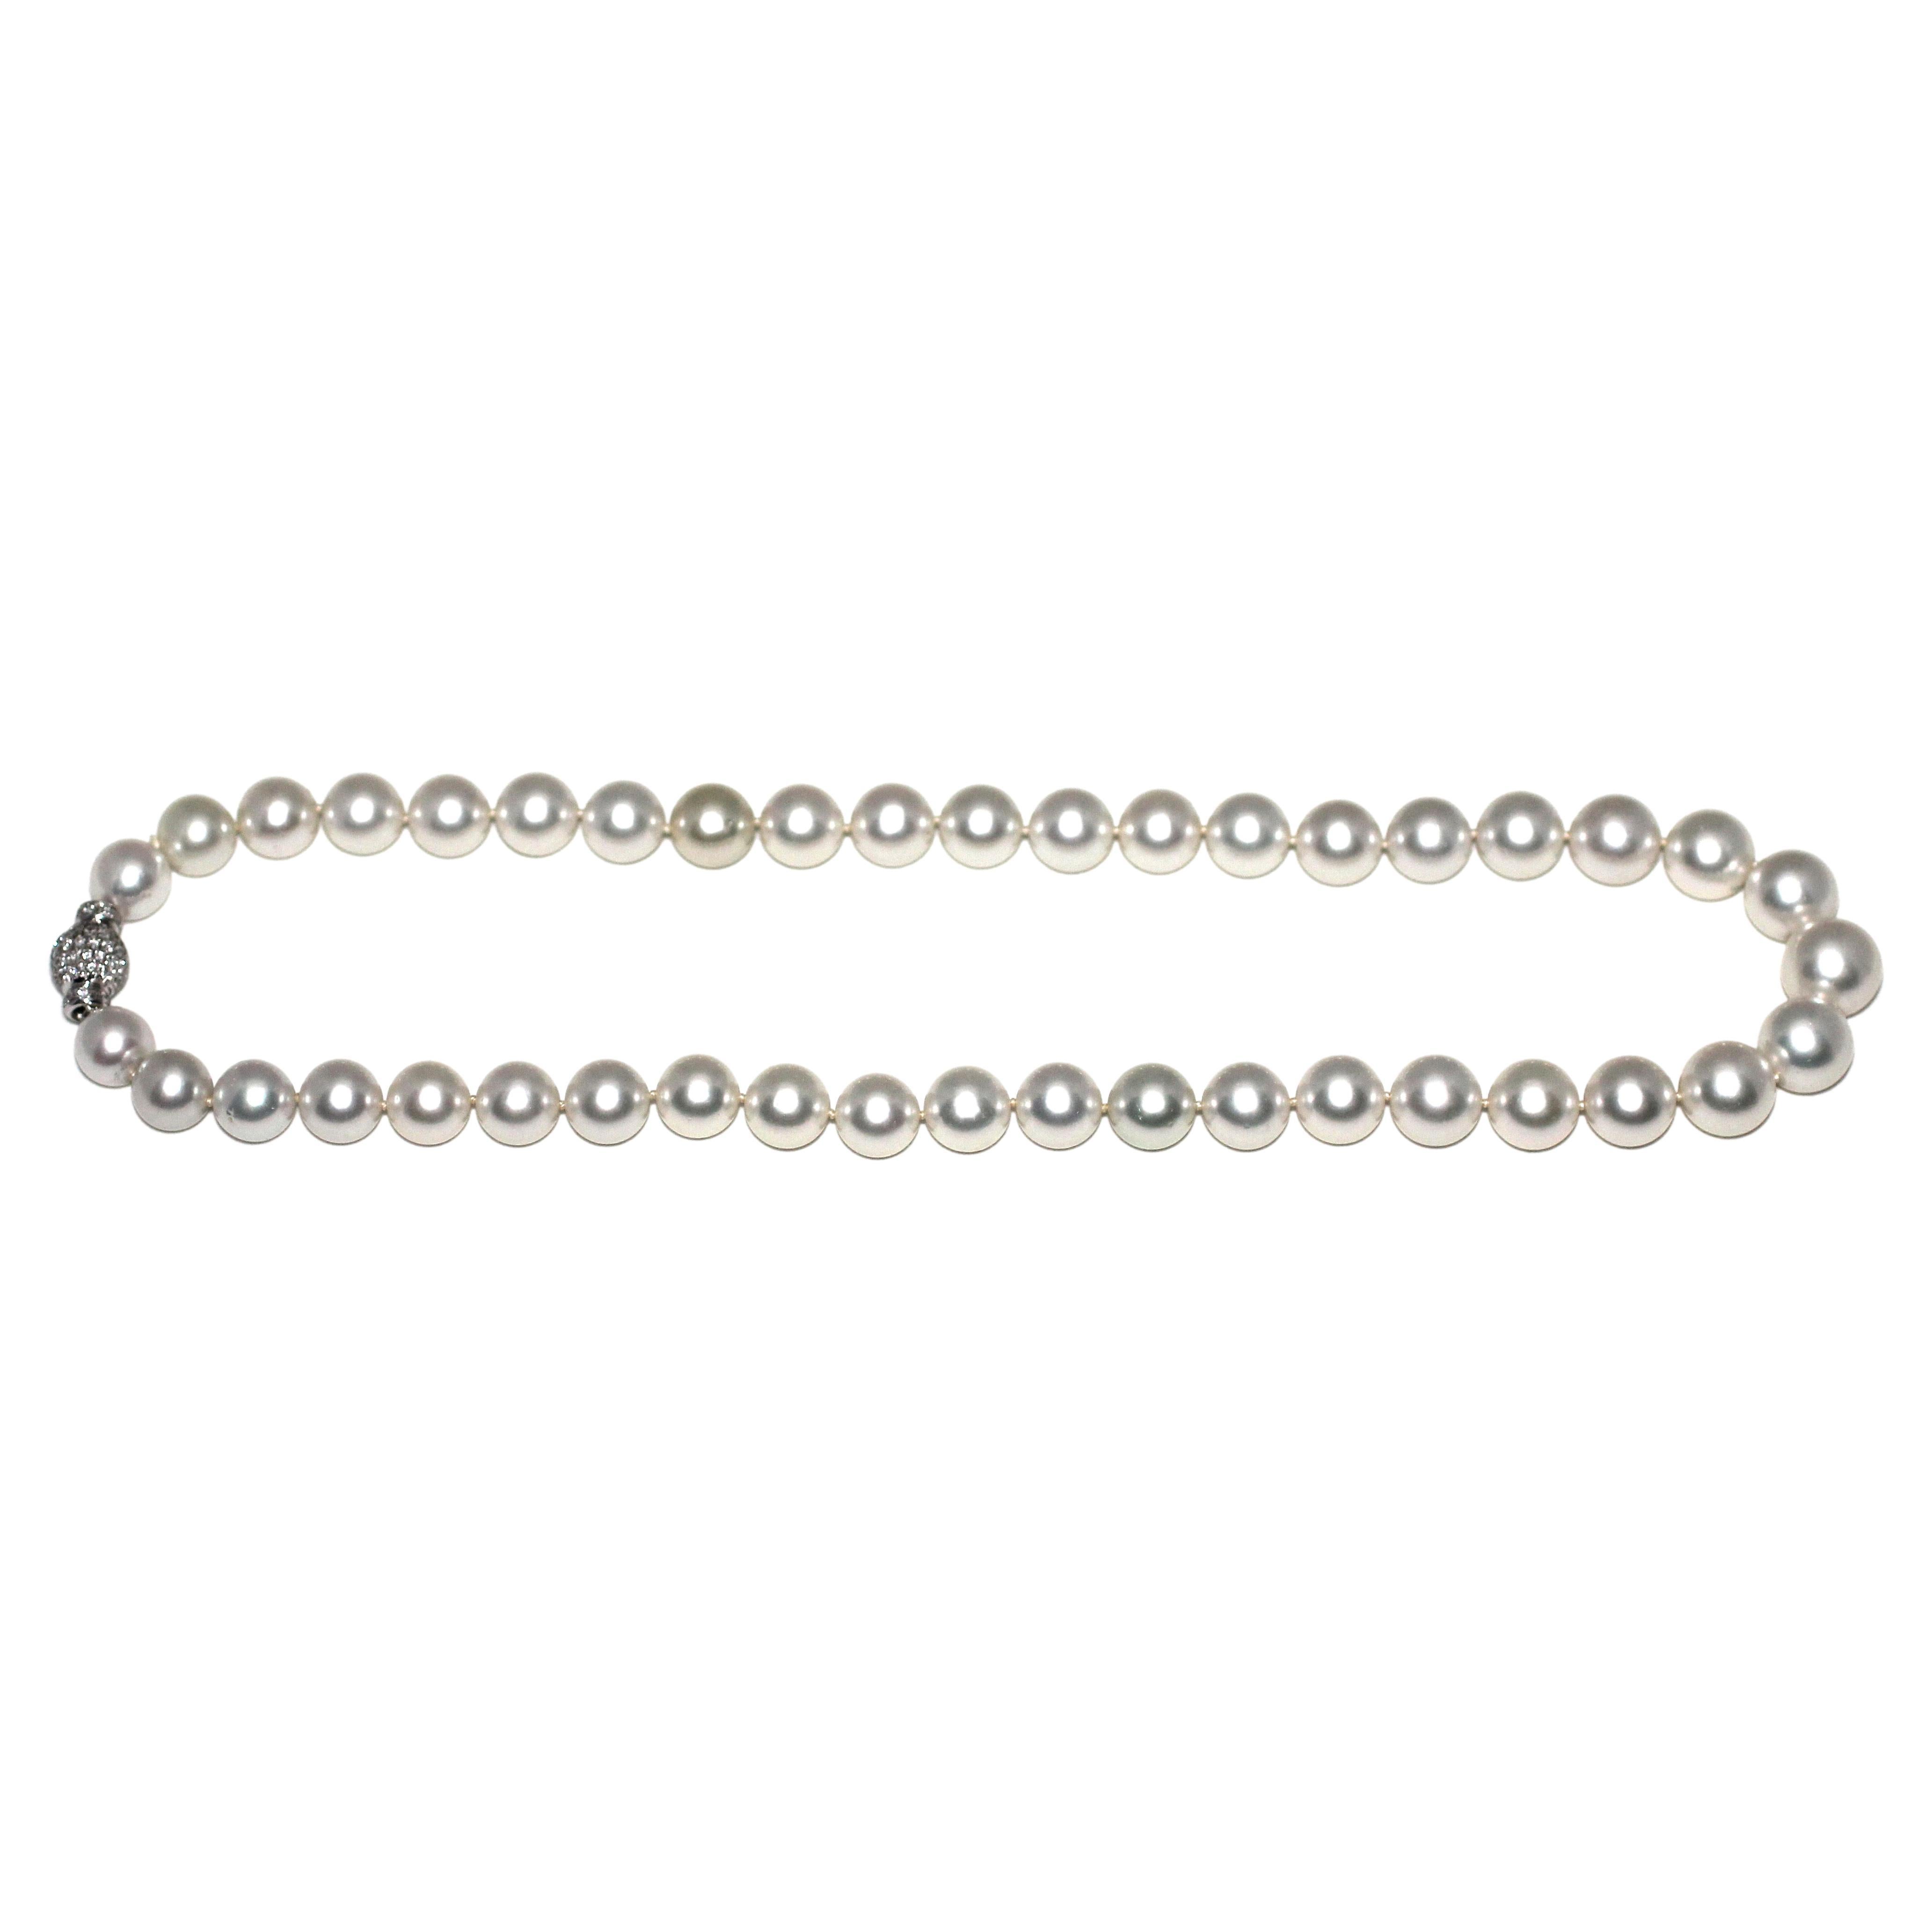 12mm Full diamond Clasp 
18K White Gold High Polish
Round Brilliant Colorless Diamond
57 Round South Sea Cultured Pearl 13.25-17.5 mm
Total Item Weight (g): 231.5
Hue: Pink
Orient: Excellent
Luster: Excellent
Surface: Very Lightly Spotted
Nacre: